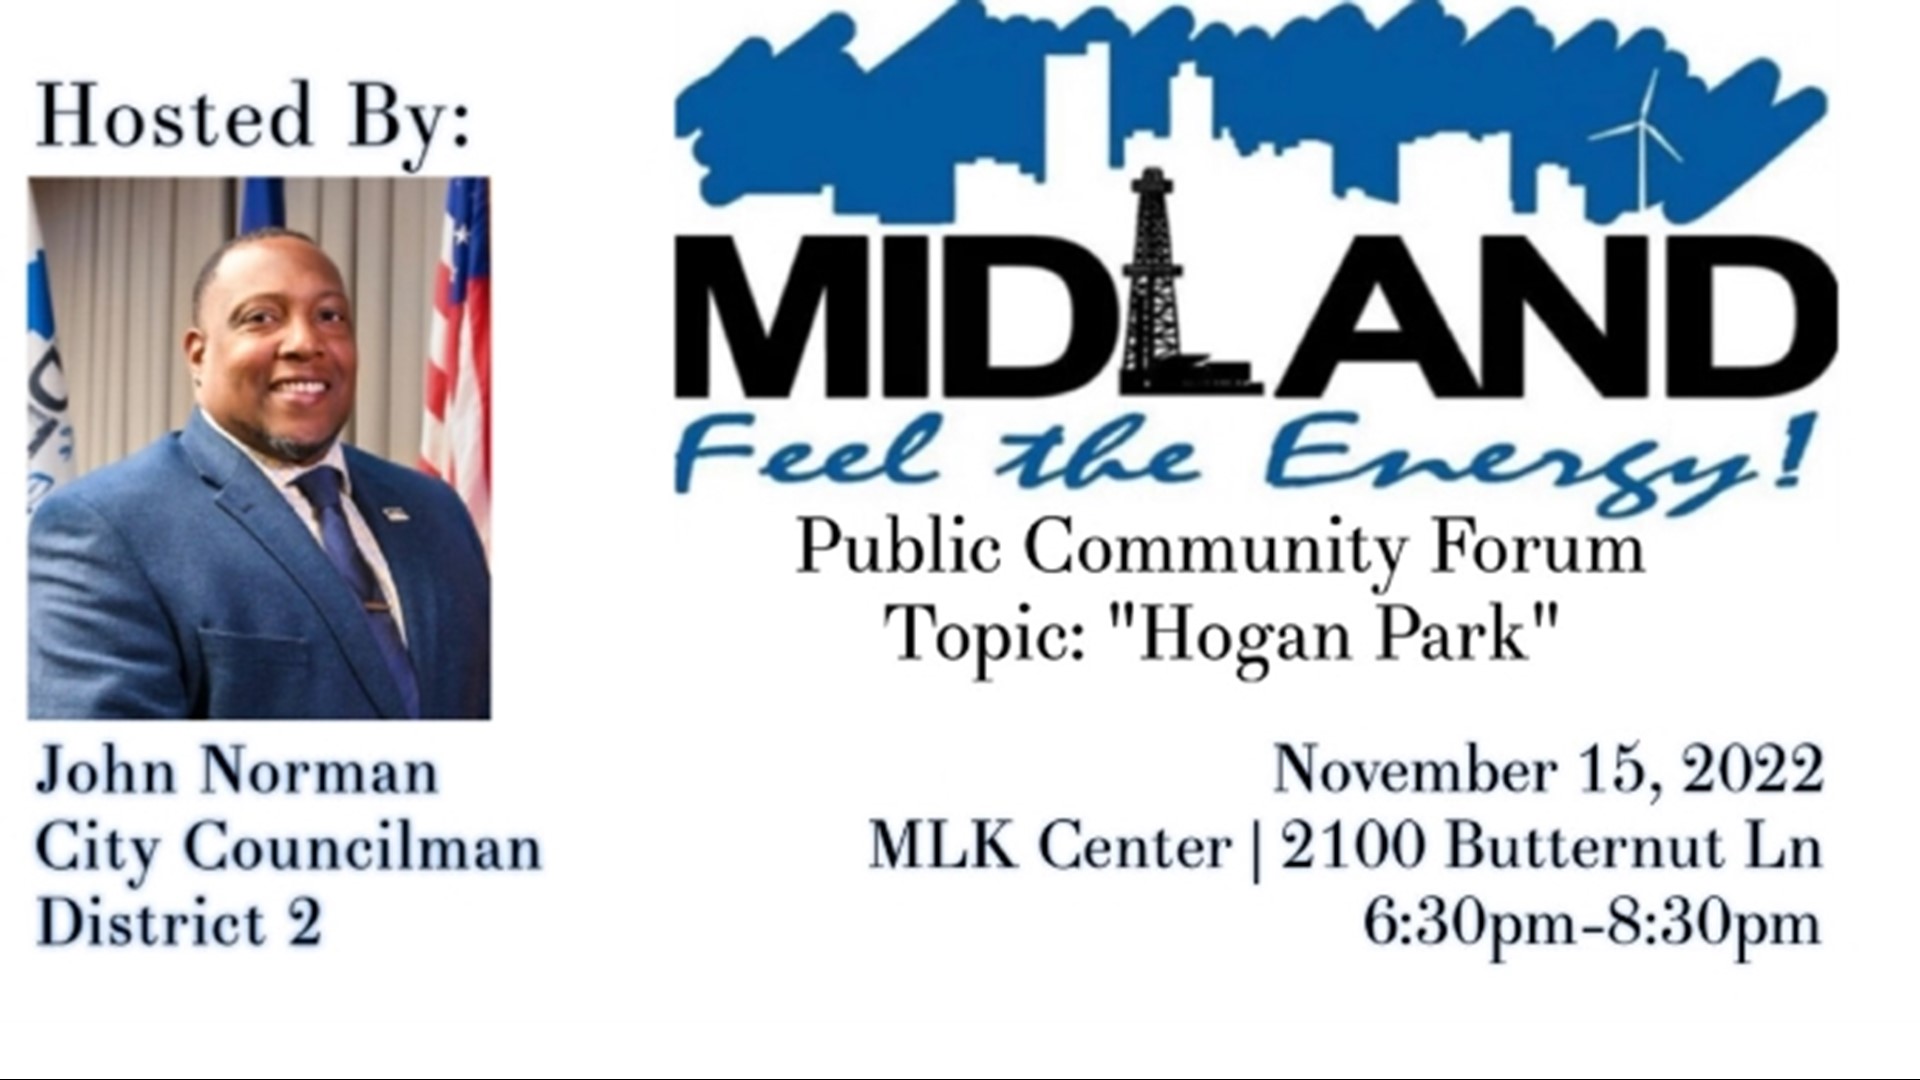 This forum will take place at the MLK center in Midland on Nov. 15 at 6:30 p.m. Everyone that wants to speak is encouraged to attend.